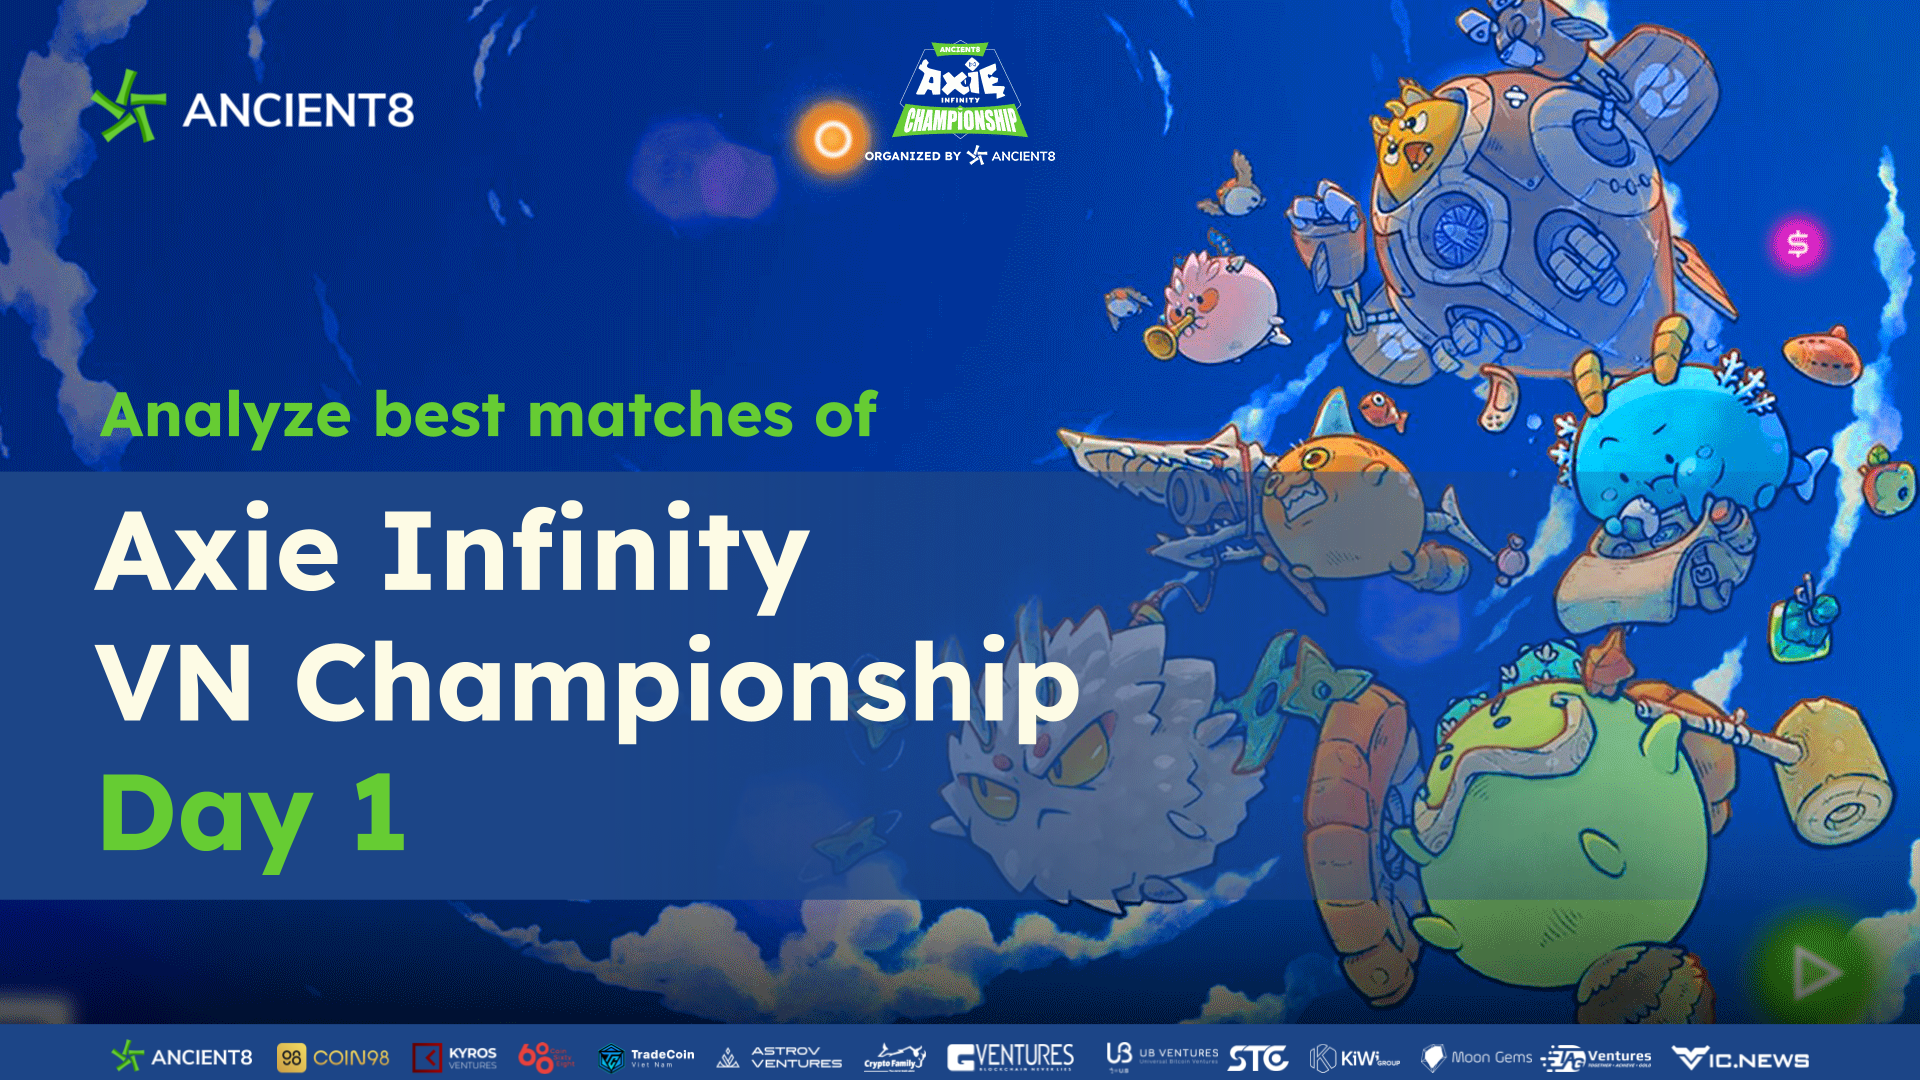 Analyze best matches of Axie Infinity VN Championship Day 1